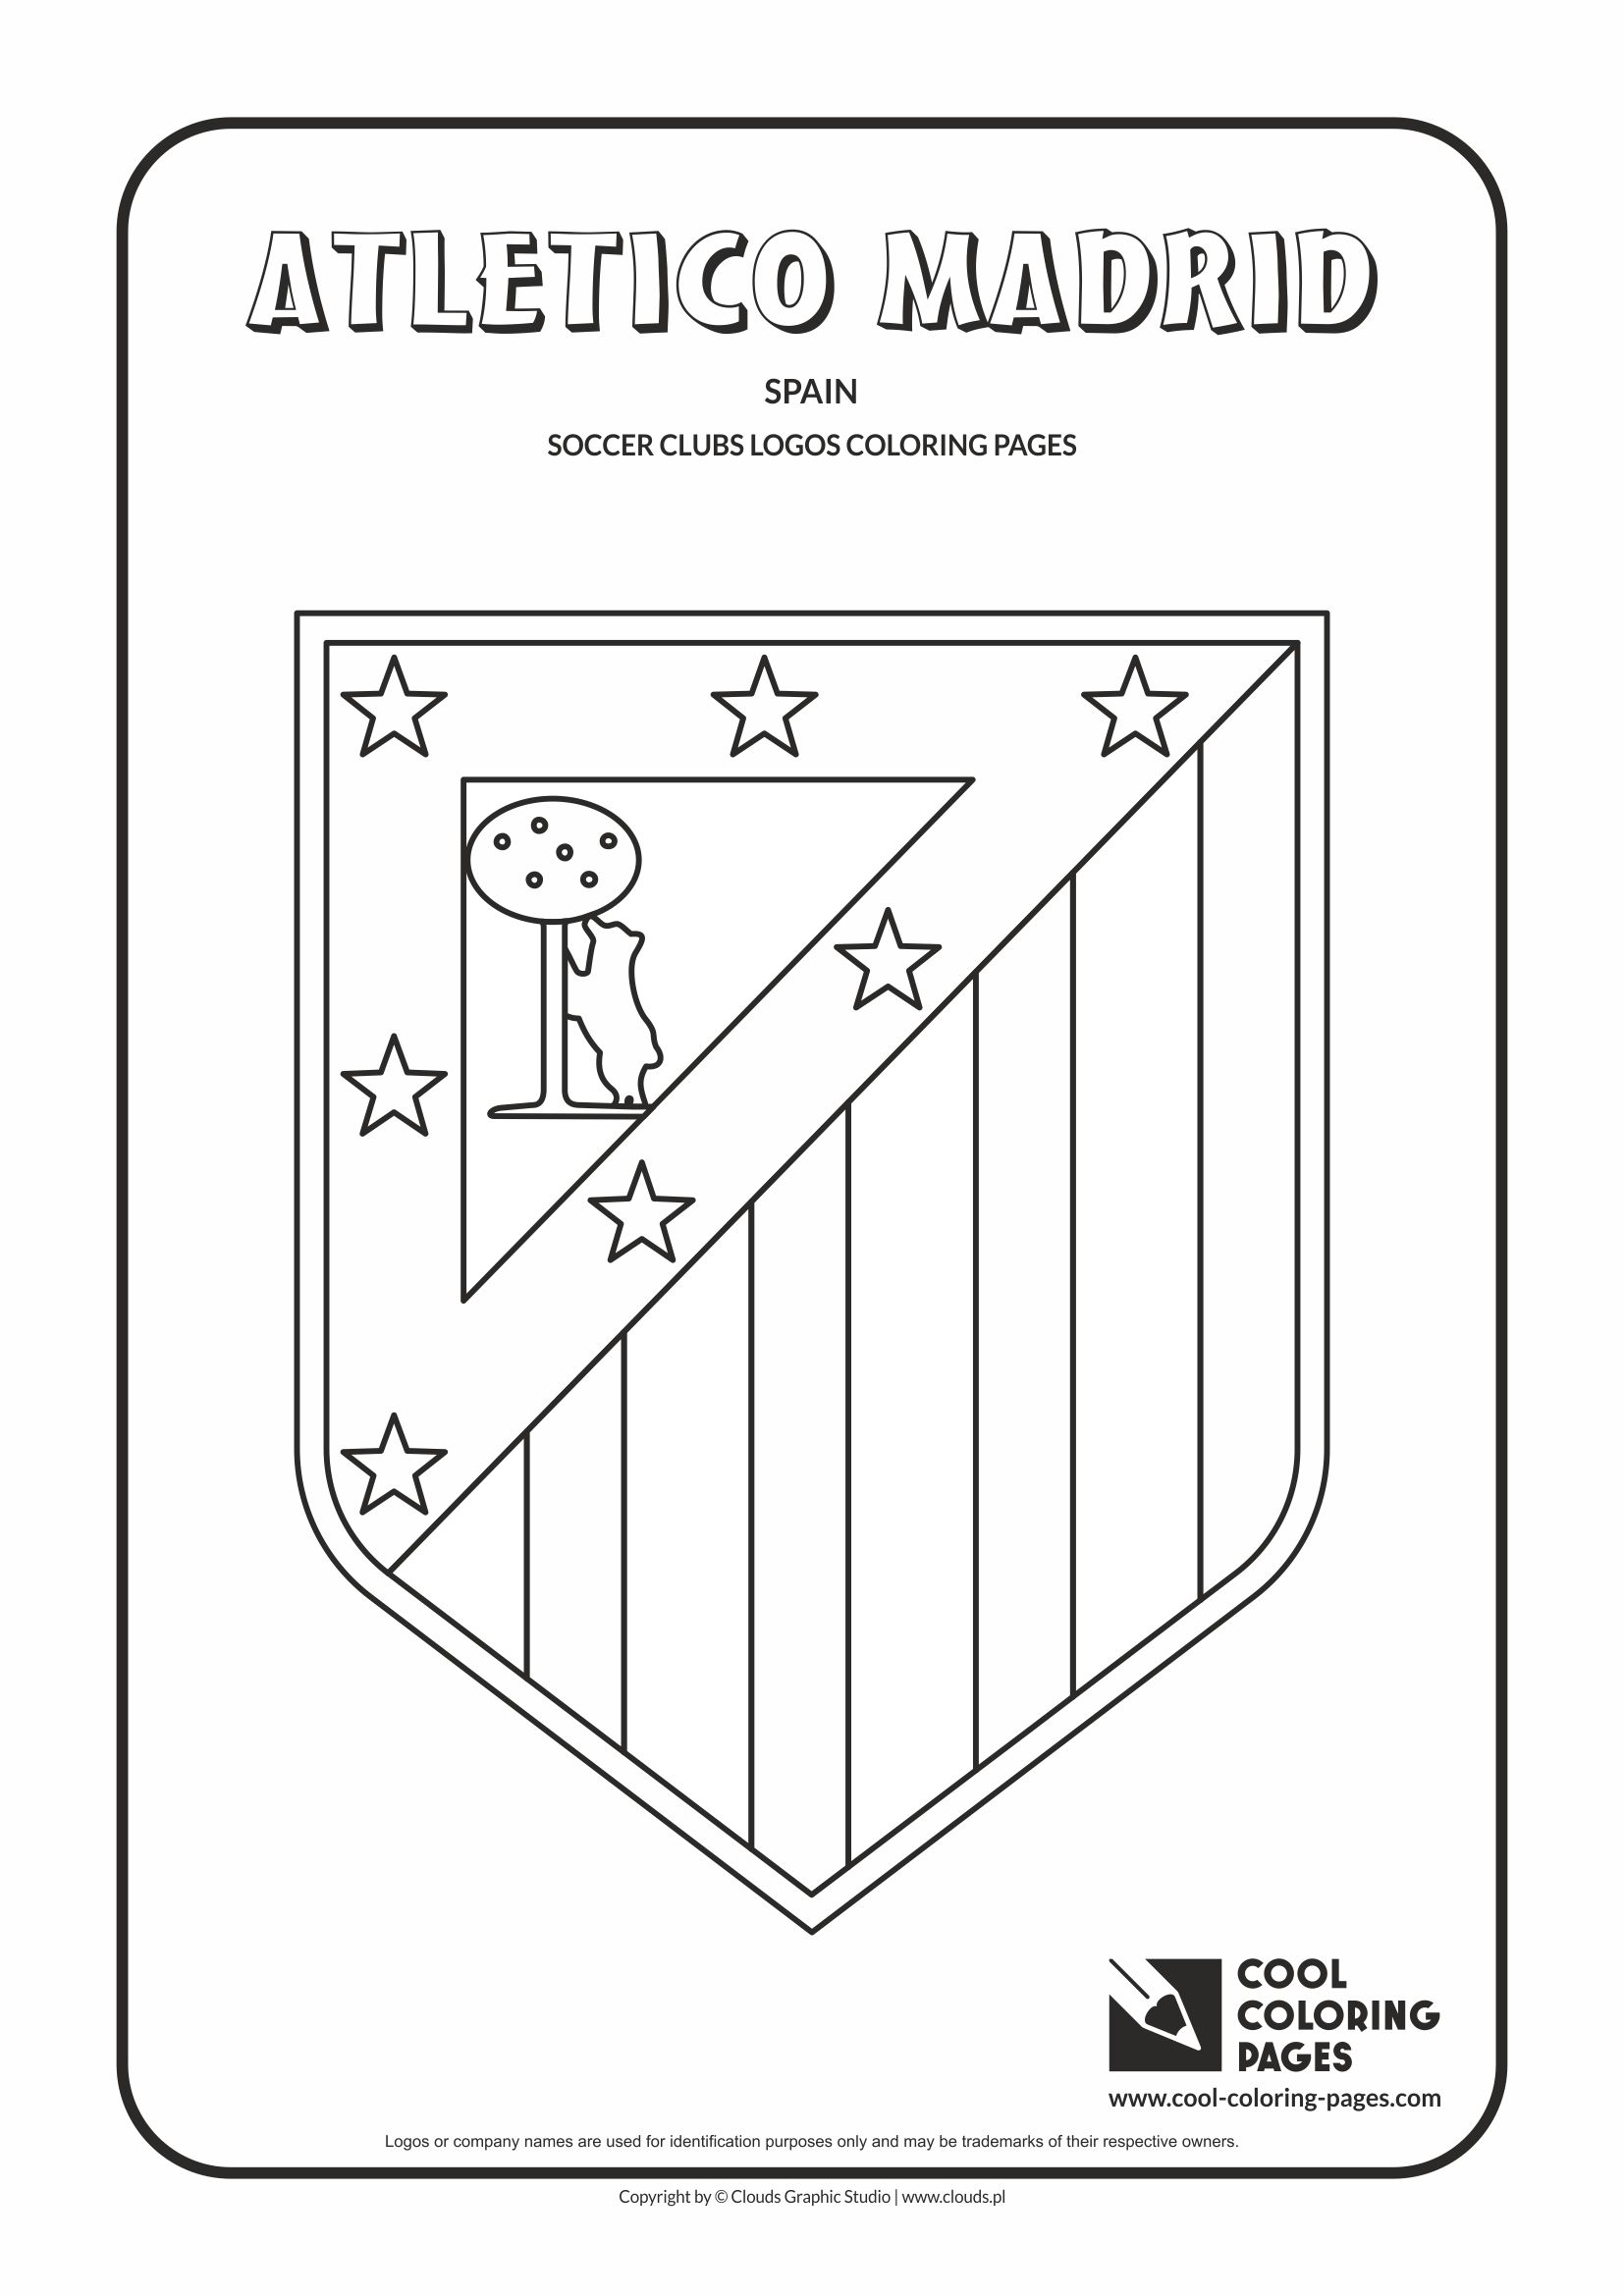 Atletico Madrid logo coloring / Coloring page with Atletico Madrid logo / Atletico Madrid logo colouring page.